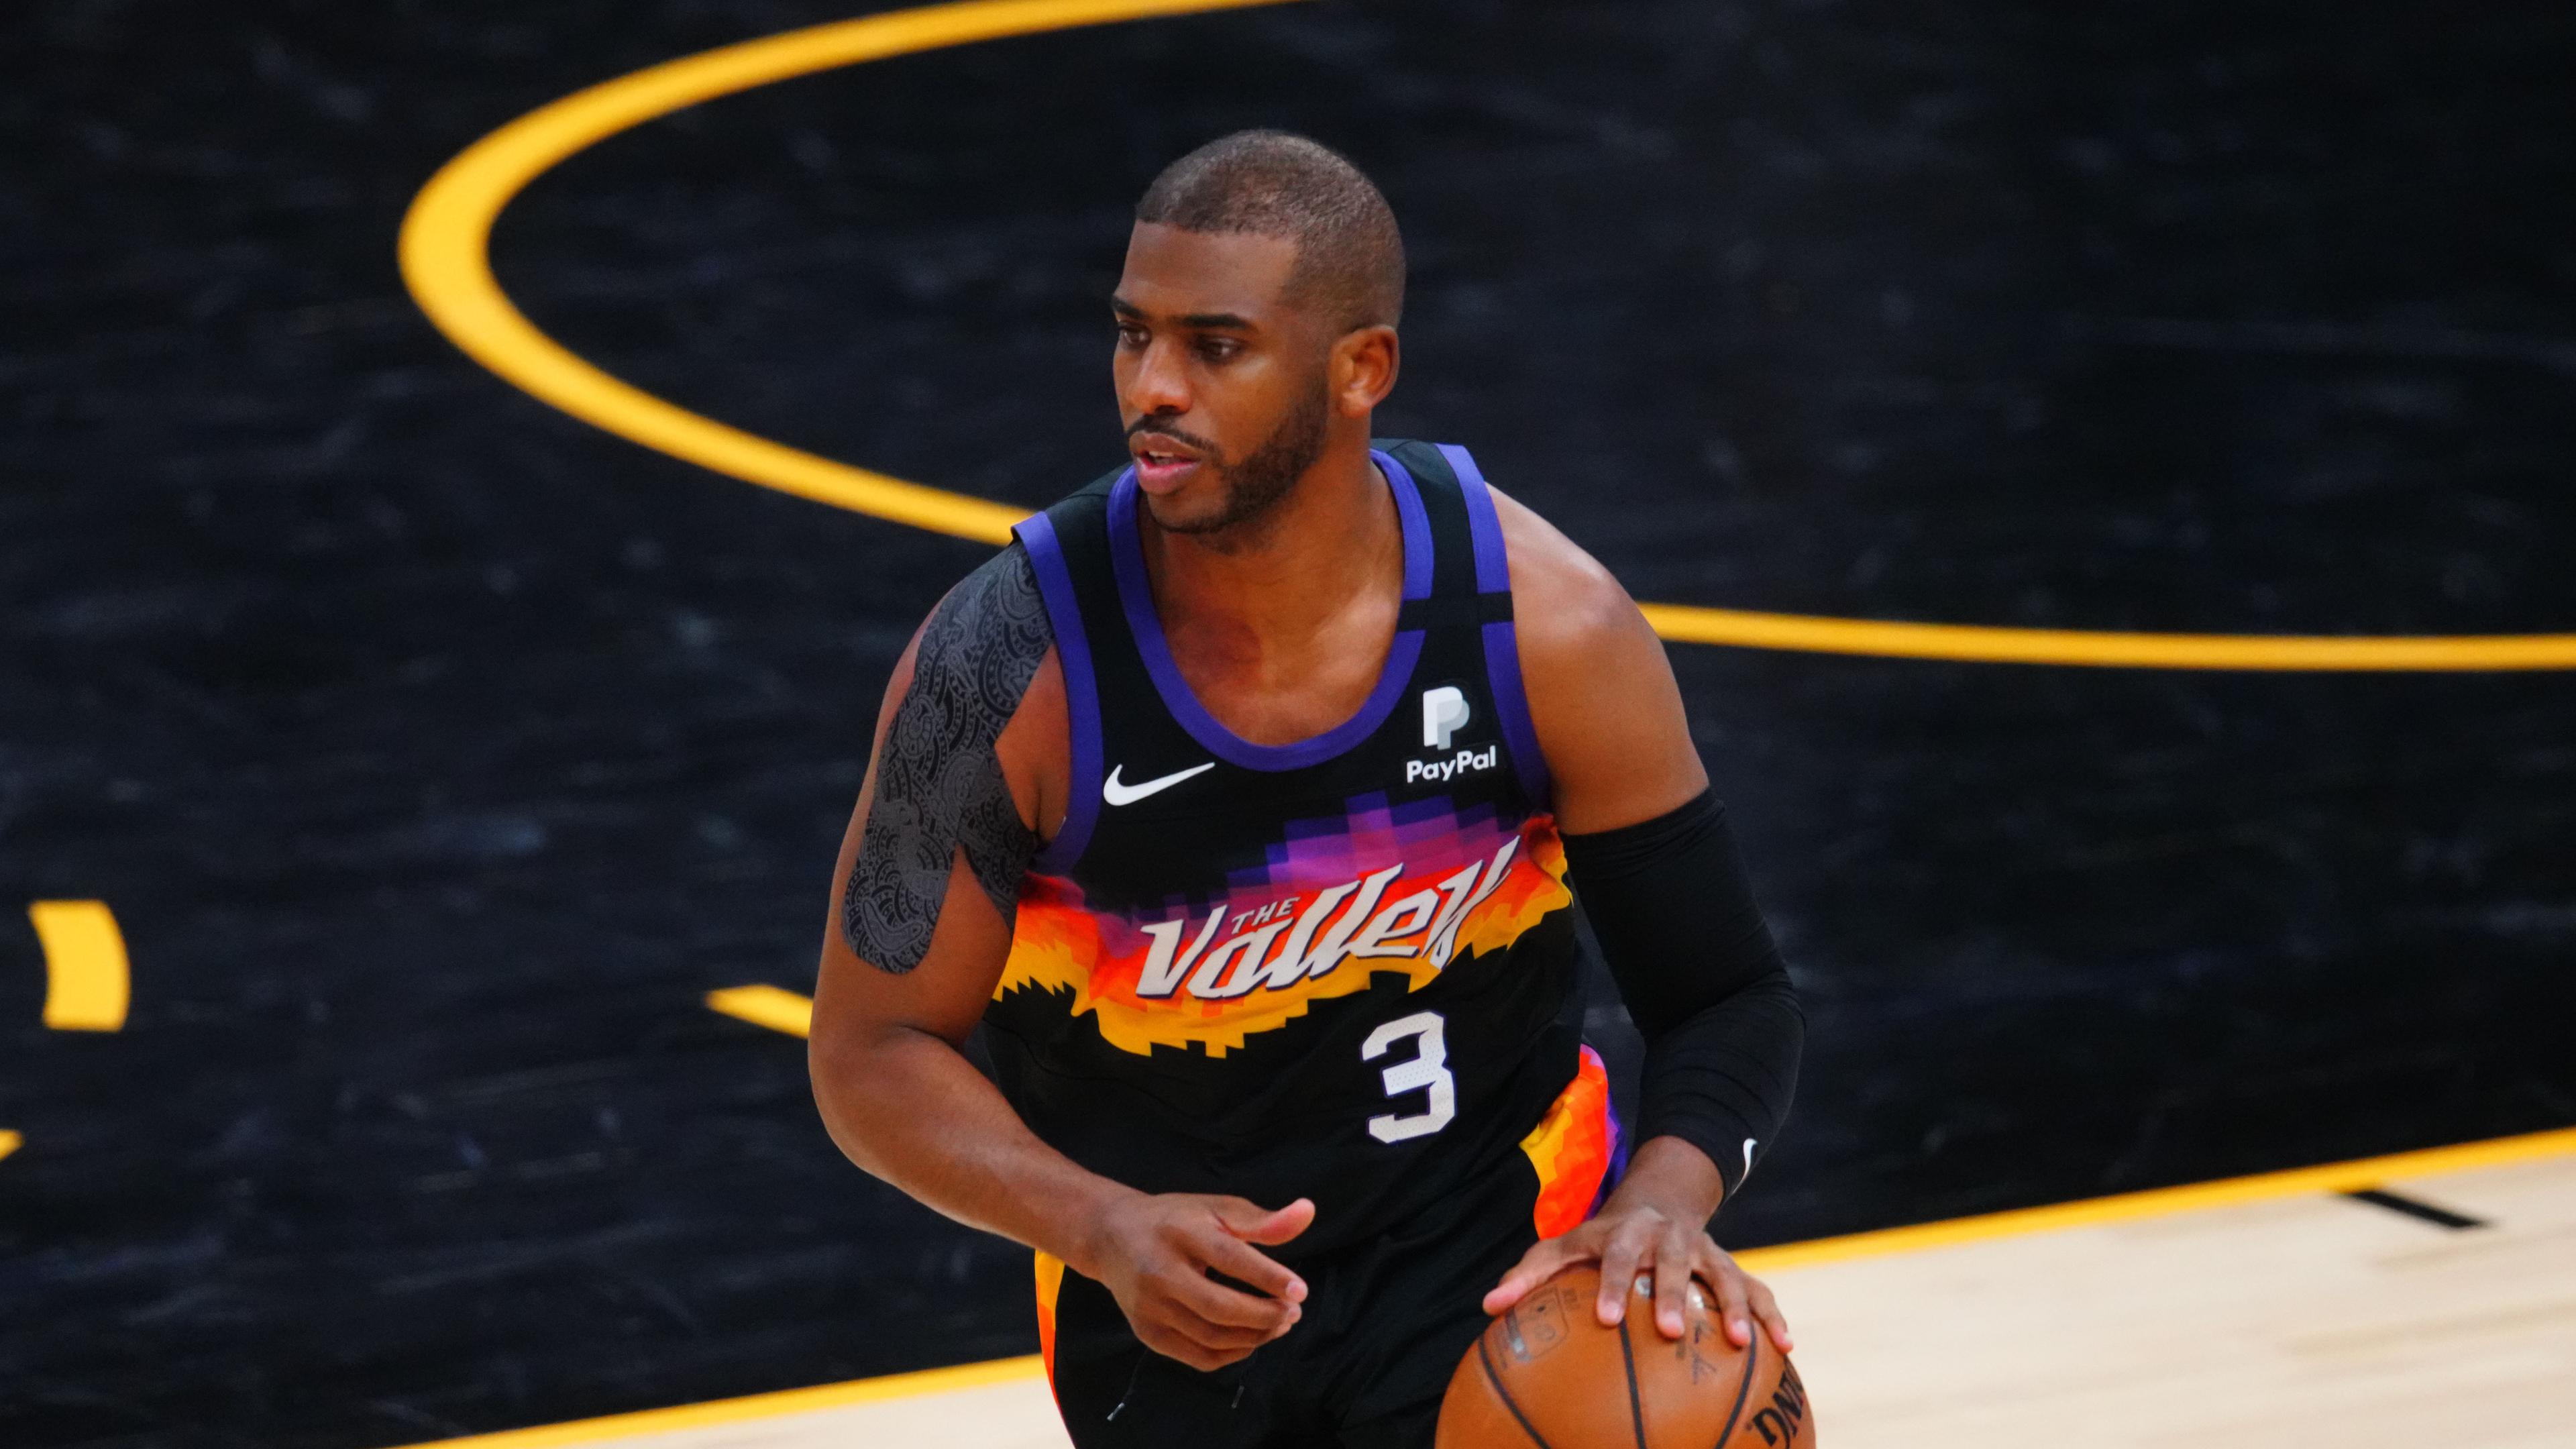 May 25, 2021; Phoenix, Arizona, USA; Phoenix Suns guard Chris Paul (3) against the Los Angeles Lakers during game two of the first round of the 2021 NBA Playoffs at Phoenix Suns Arena. / Mark J. Rebilas-USA TODAY Sports